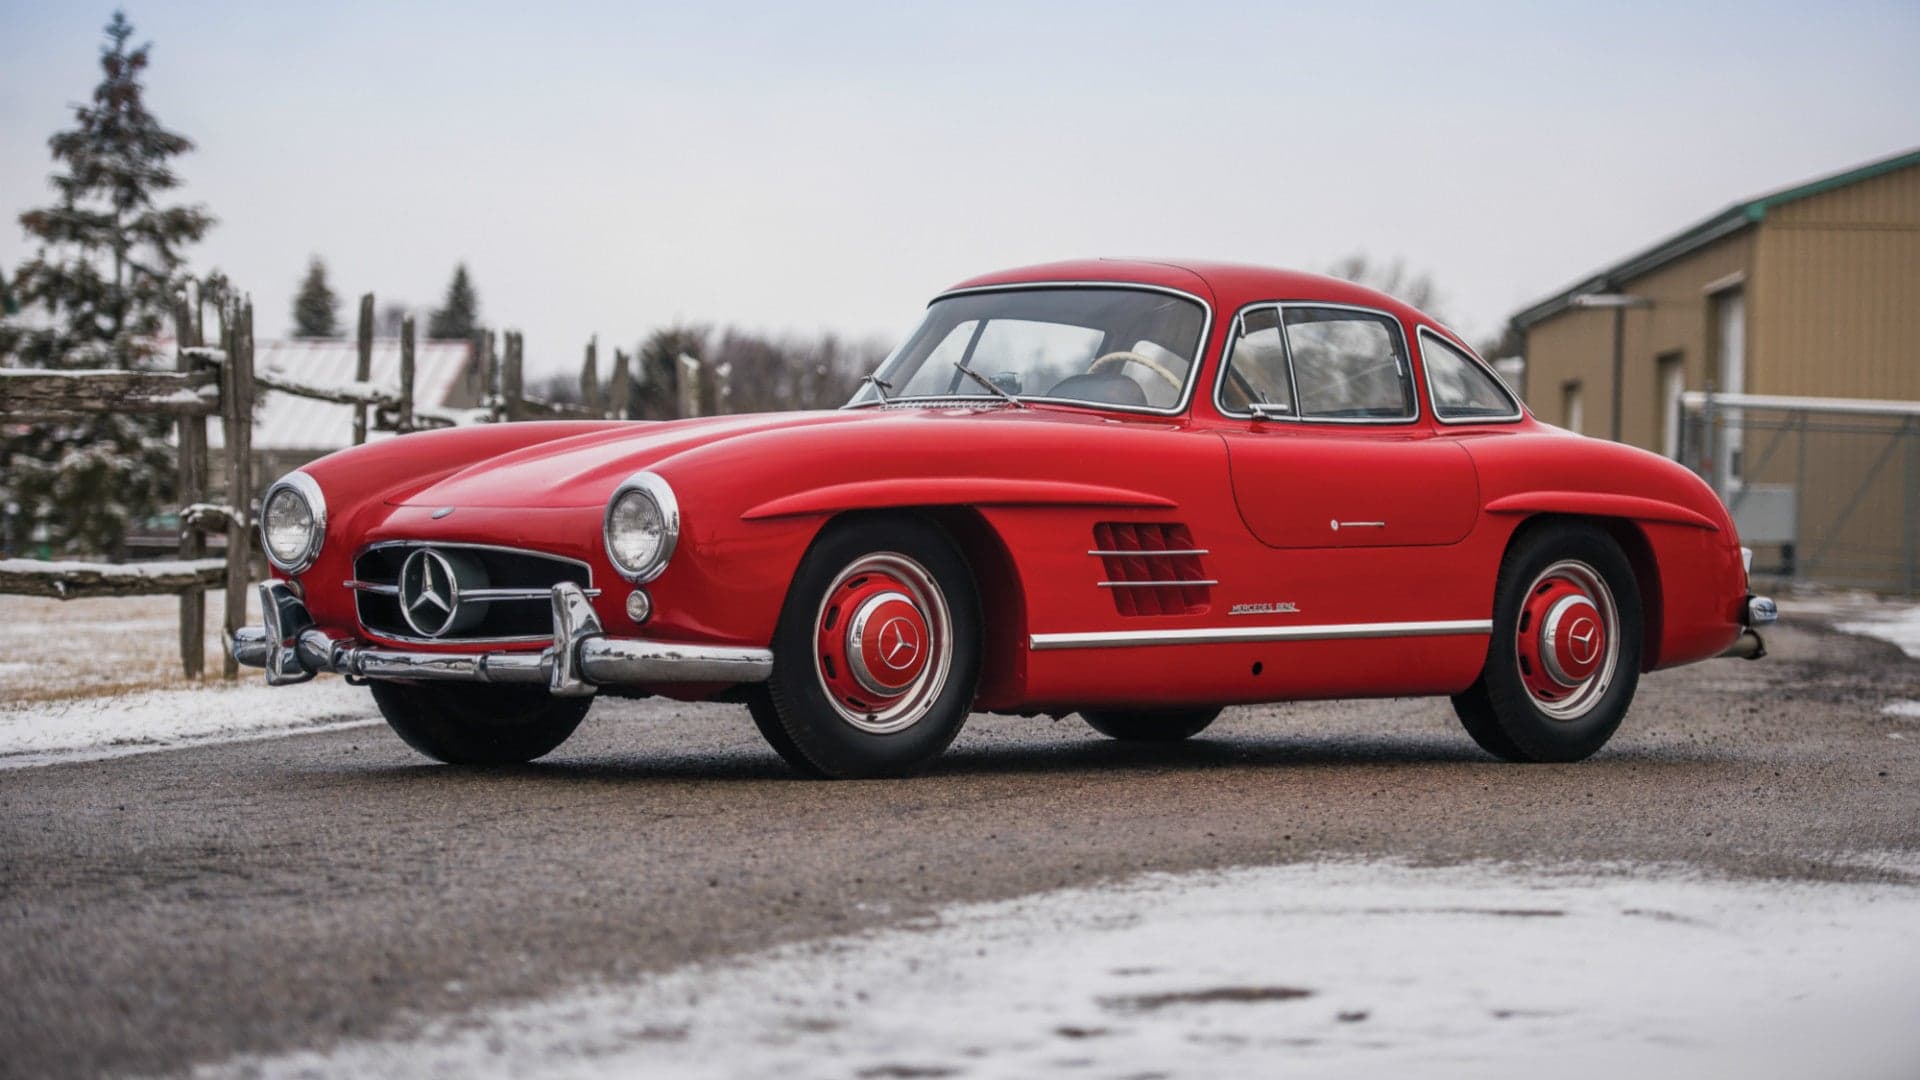 Every Dollar From the Auction of This Unrestored Mercedes-Benz 300 SL Is Going to the YMCA